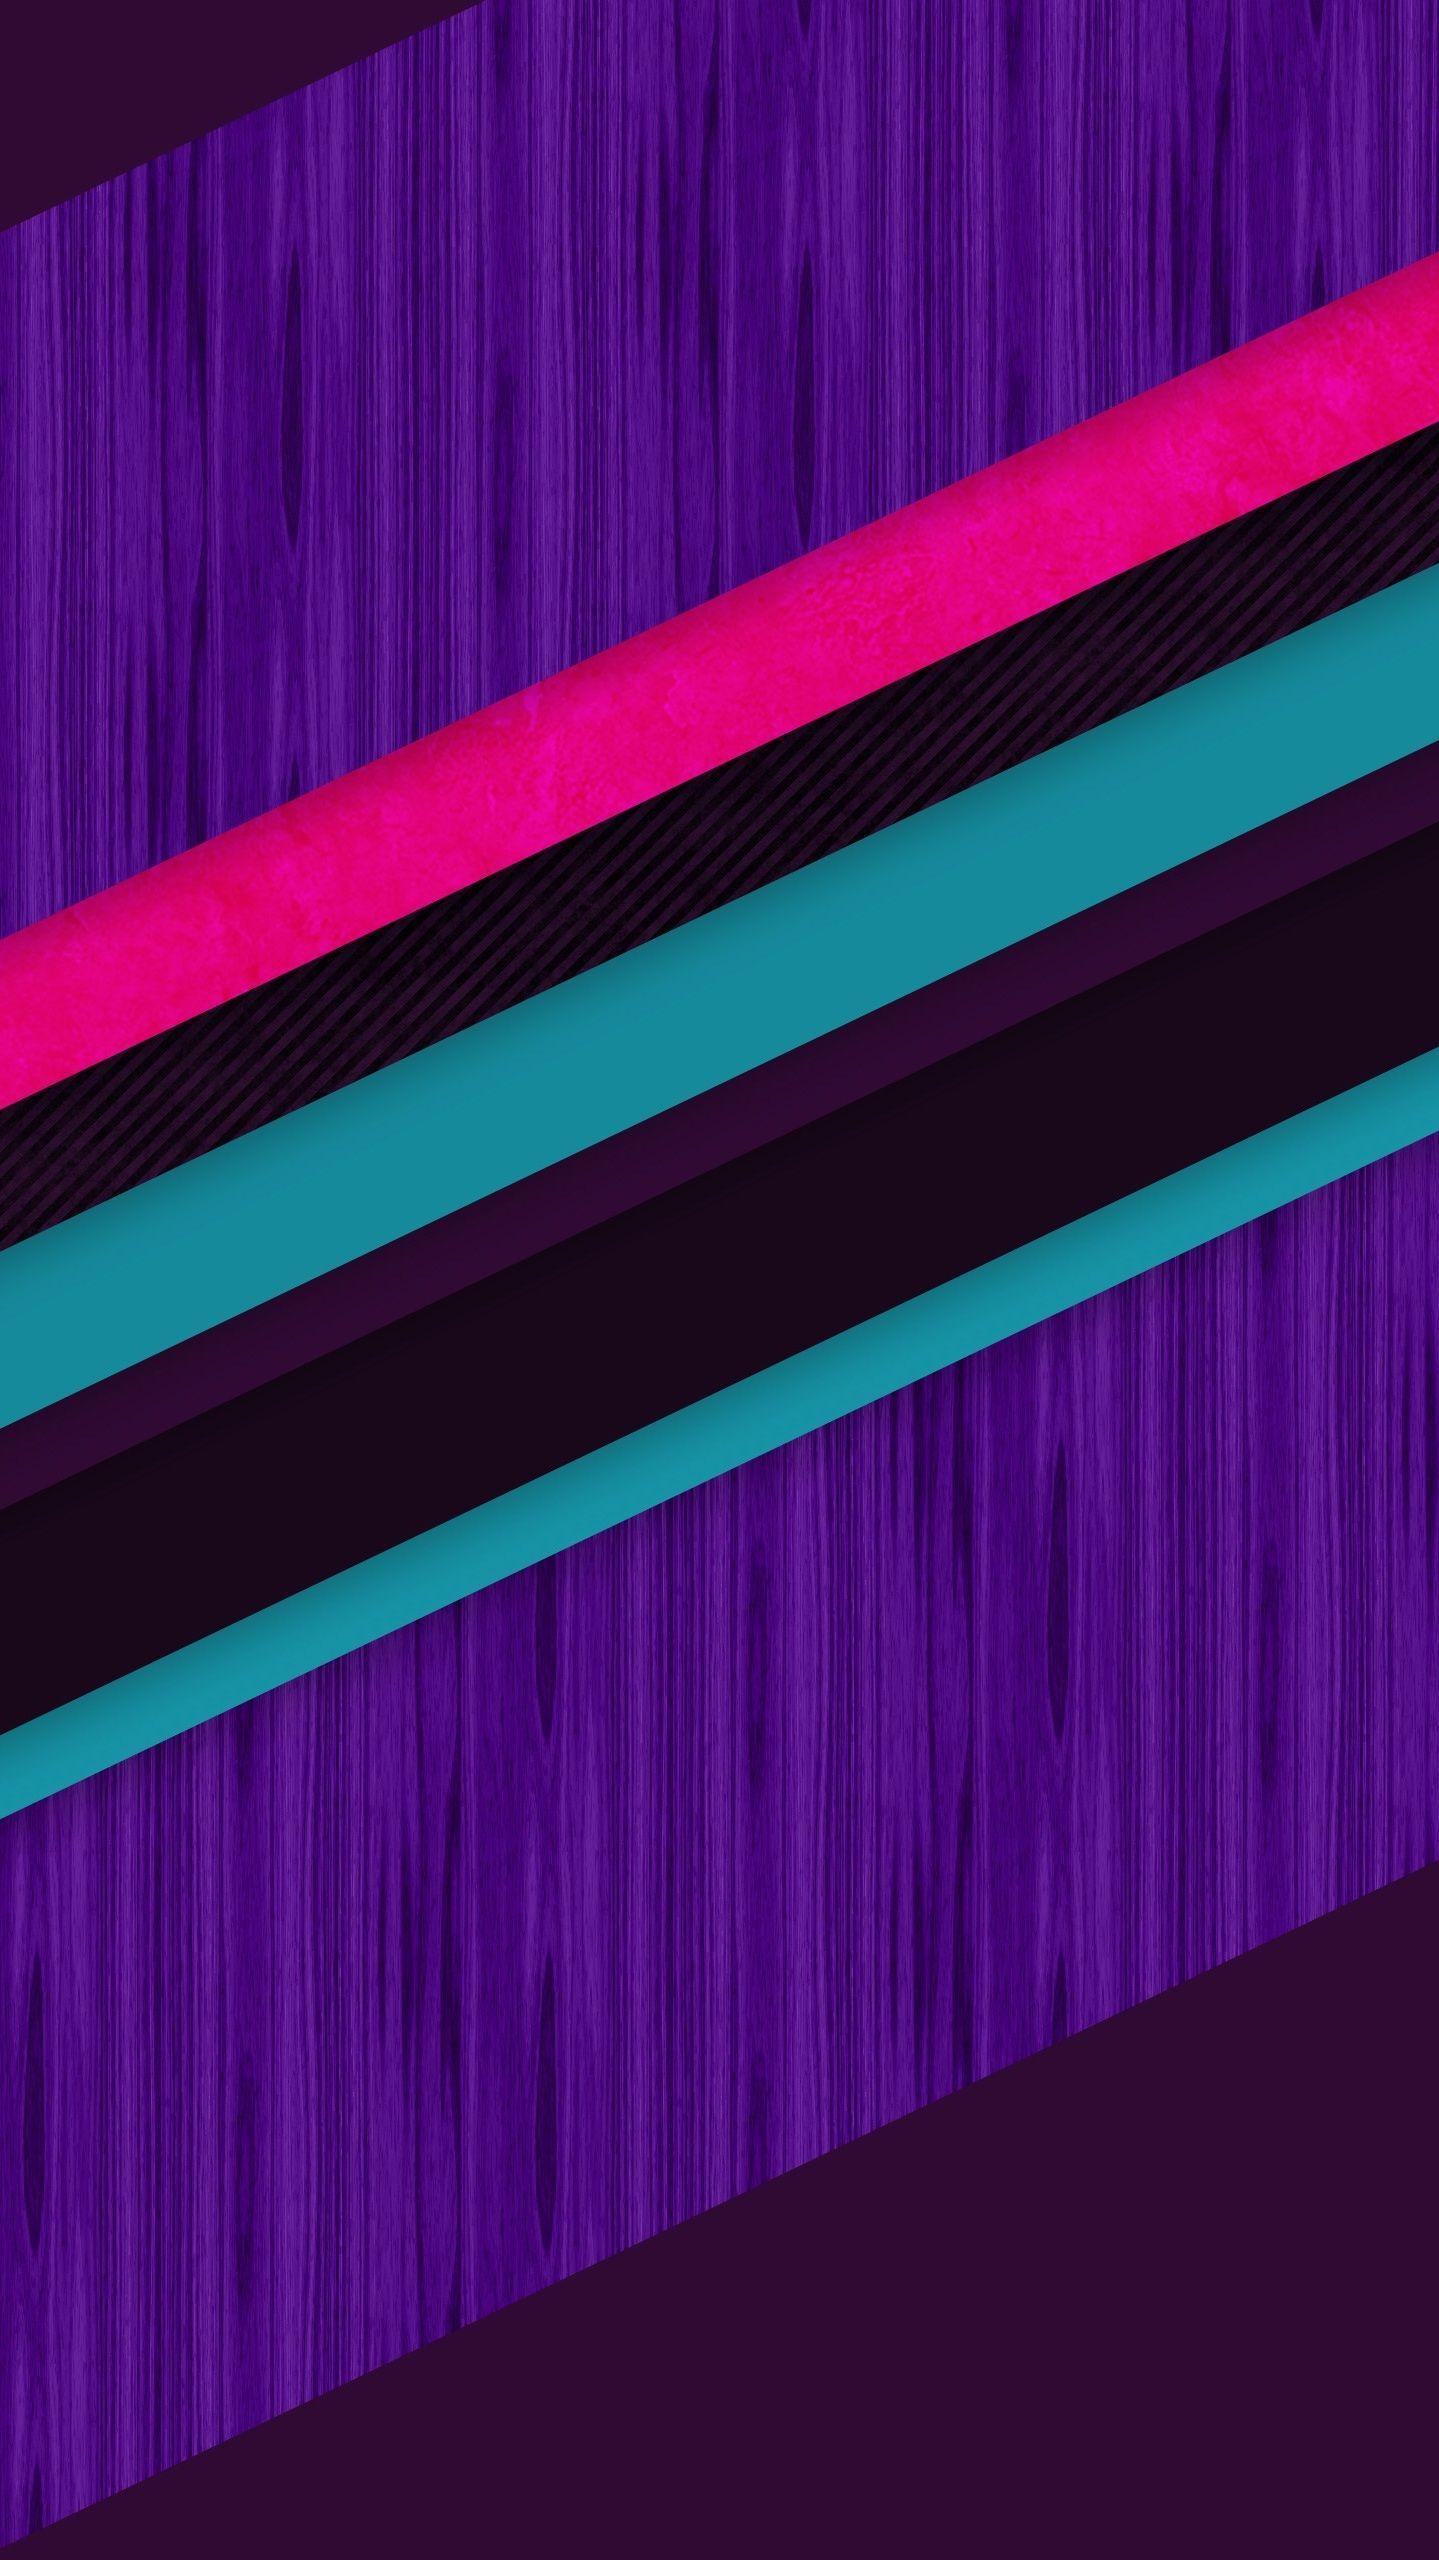 Purple and Pink Abstract Wallpaper. *Abstract and Geometric